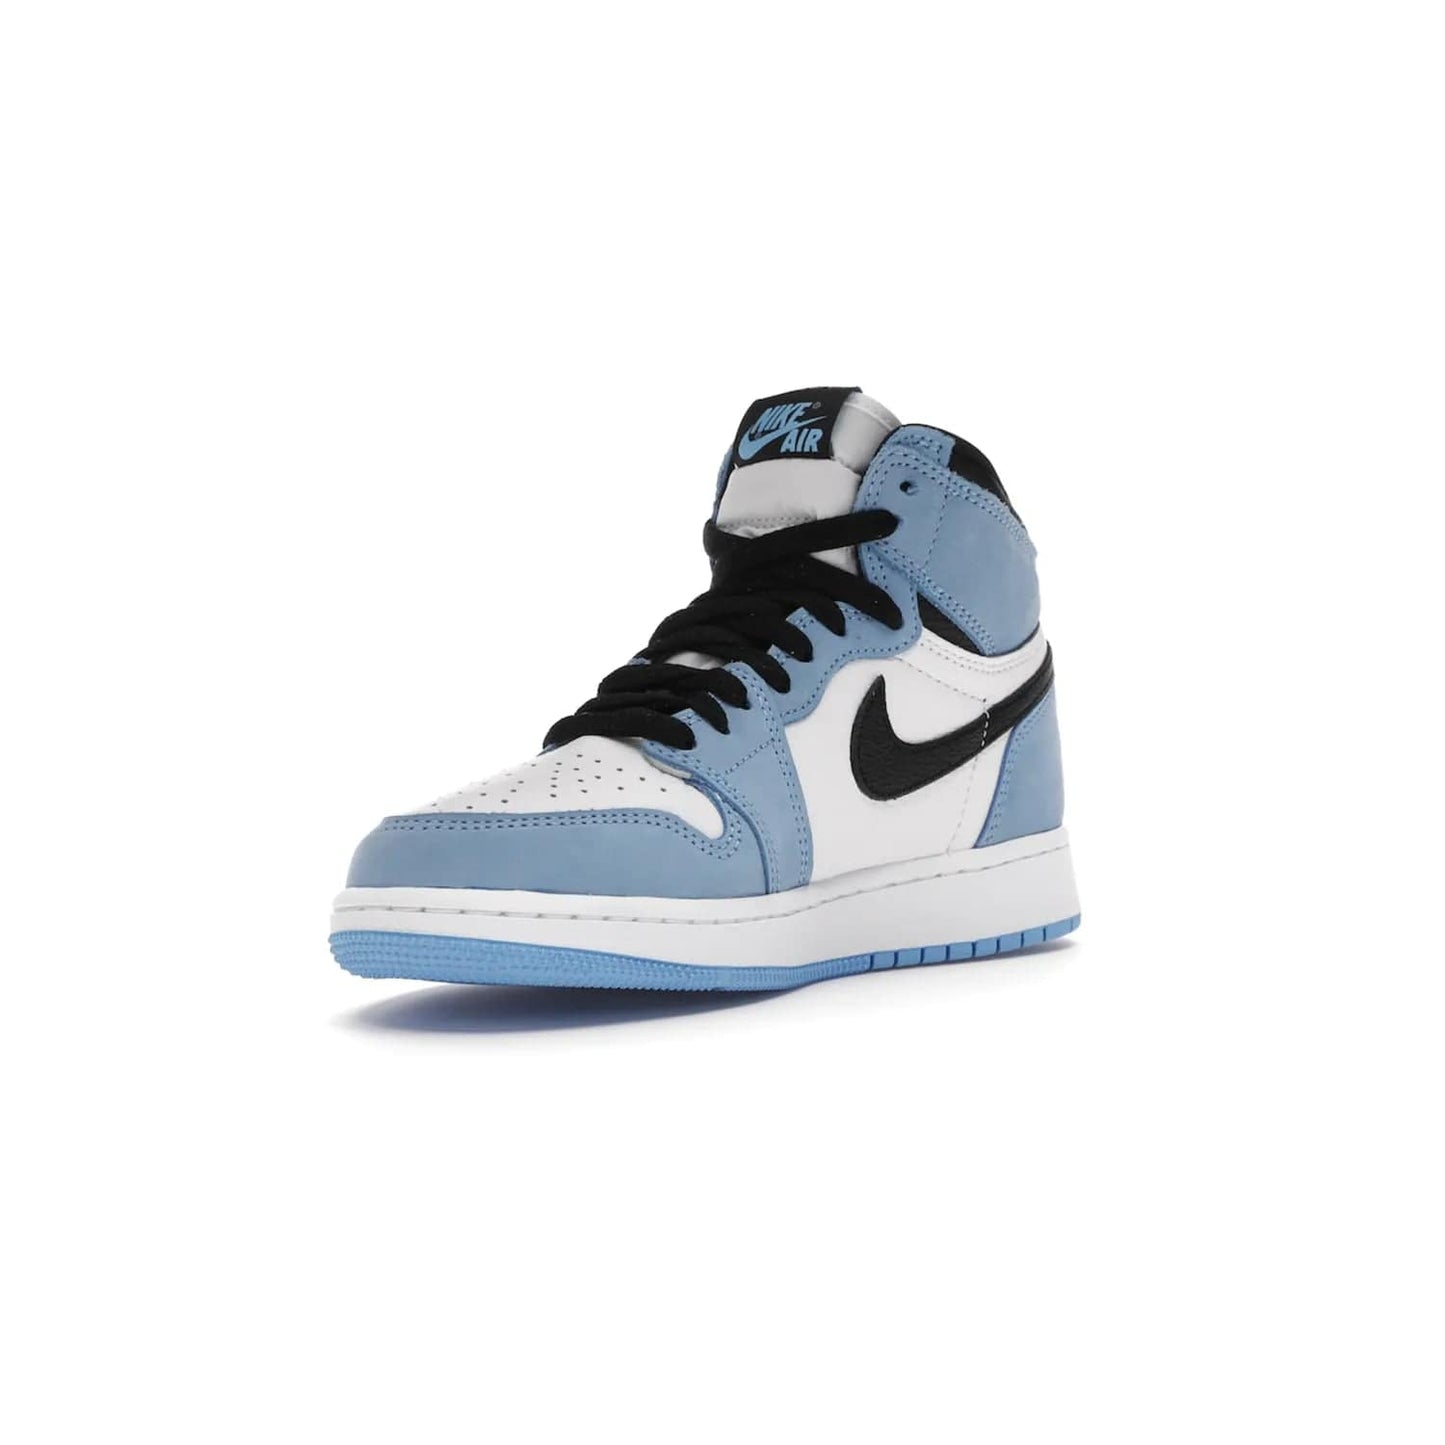 Jordan 1 Retro High White University Blue Black (GS) - Image 14 - Only at www.BallersClubKickz.com - Air Jordan 1 Retro High White University Blue Black GS: the latest offering from the iconic Air Jordan 1 line. White tumbled leather upper with University Blue overlays and black detailing. University Blue outsole and white midsole. March 6 release.